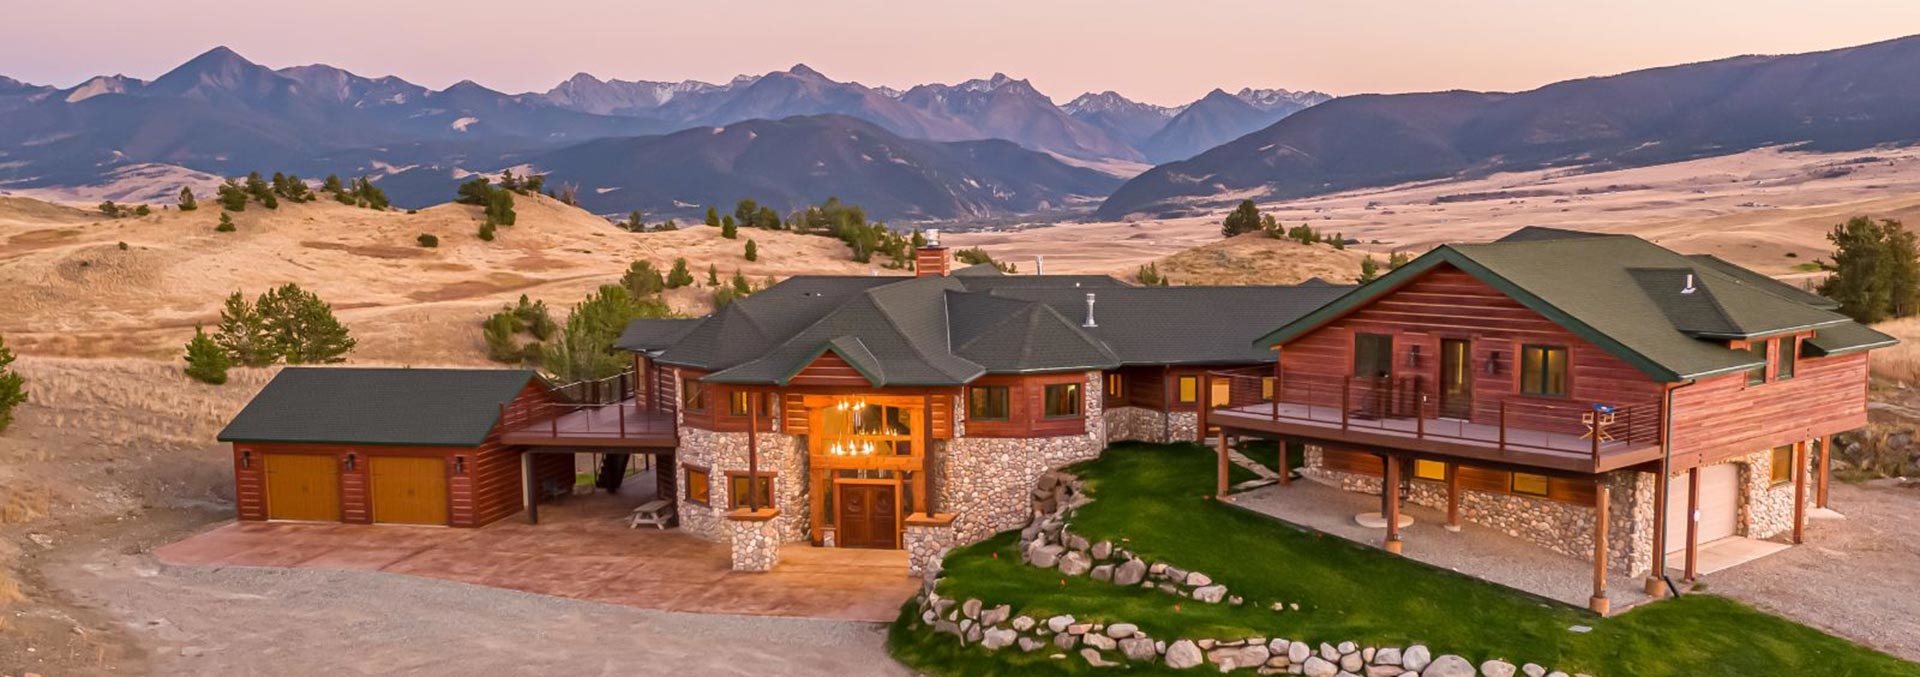 montana hunting land for sale paradise view lodge